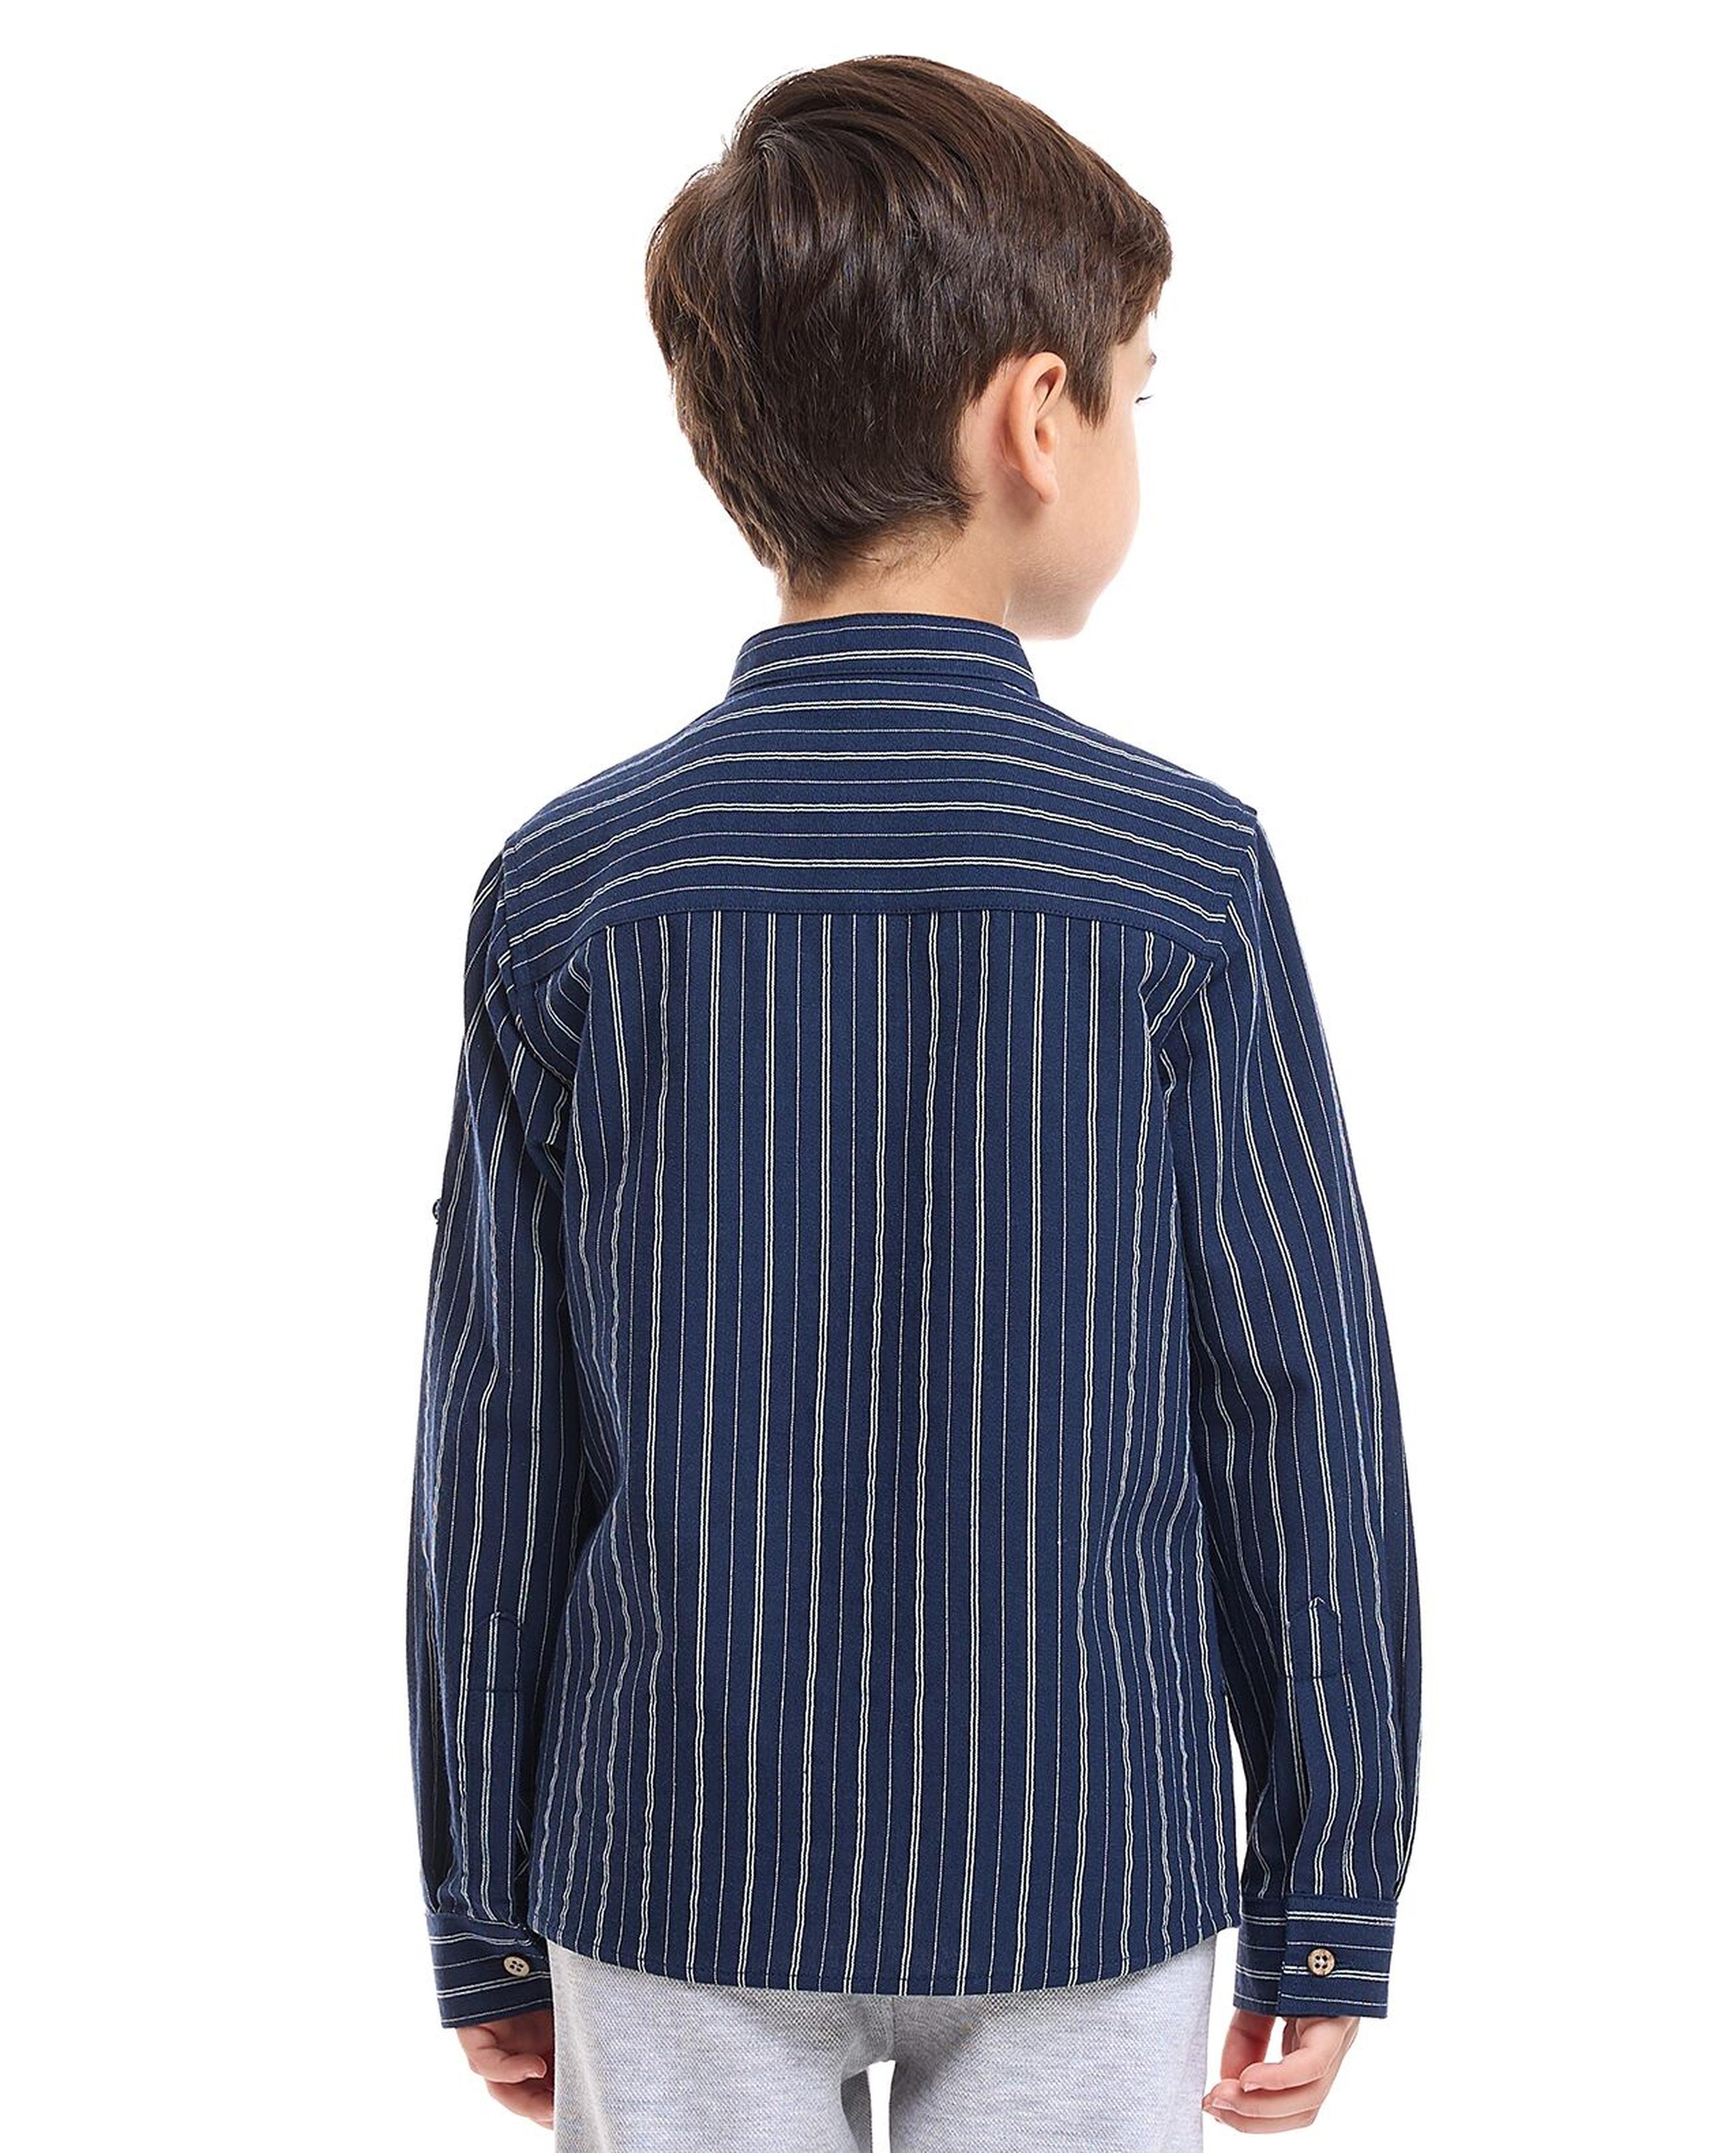 Striped Shirt with Mandarin Collar and Long Sleeves